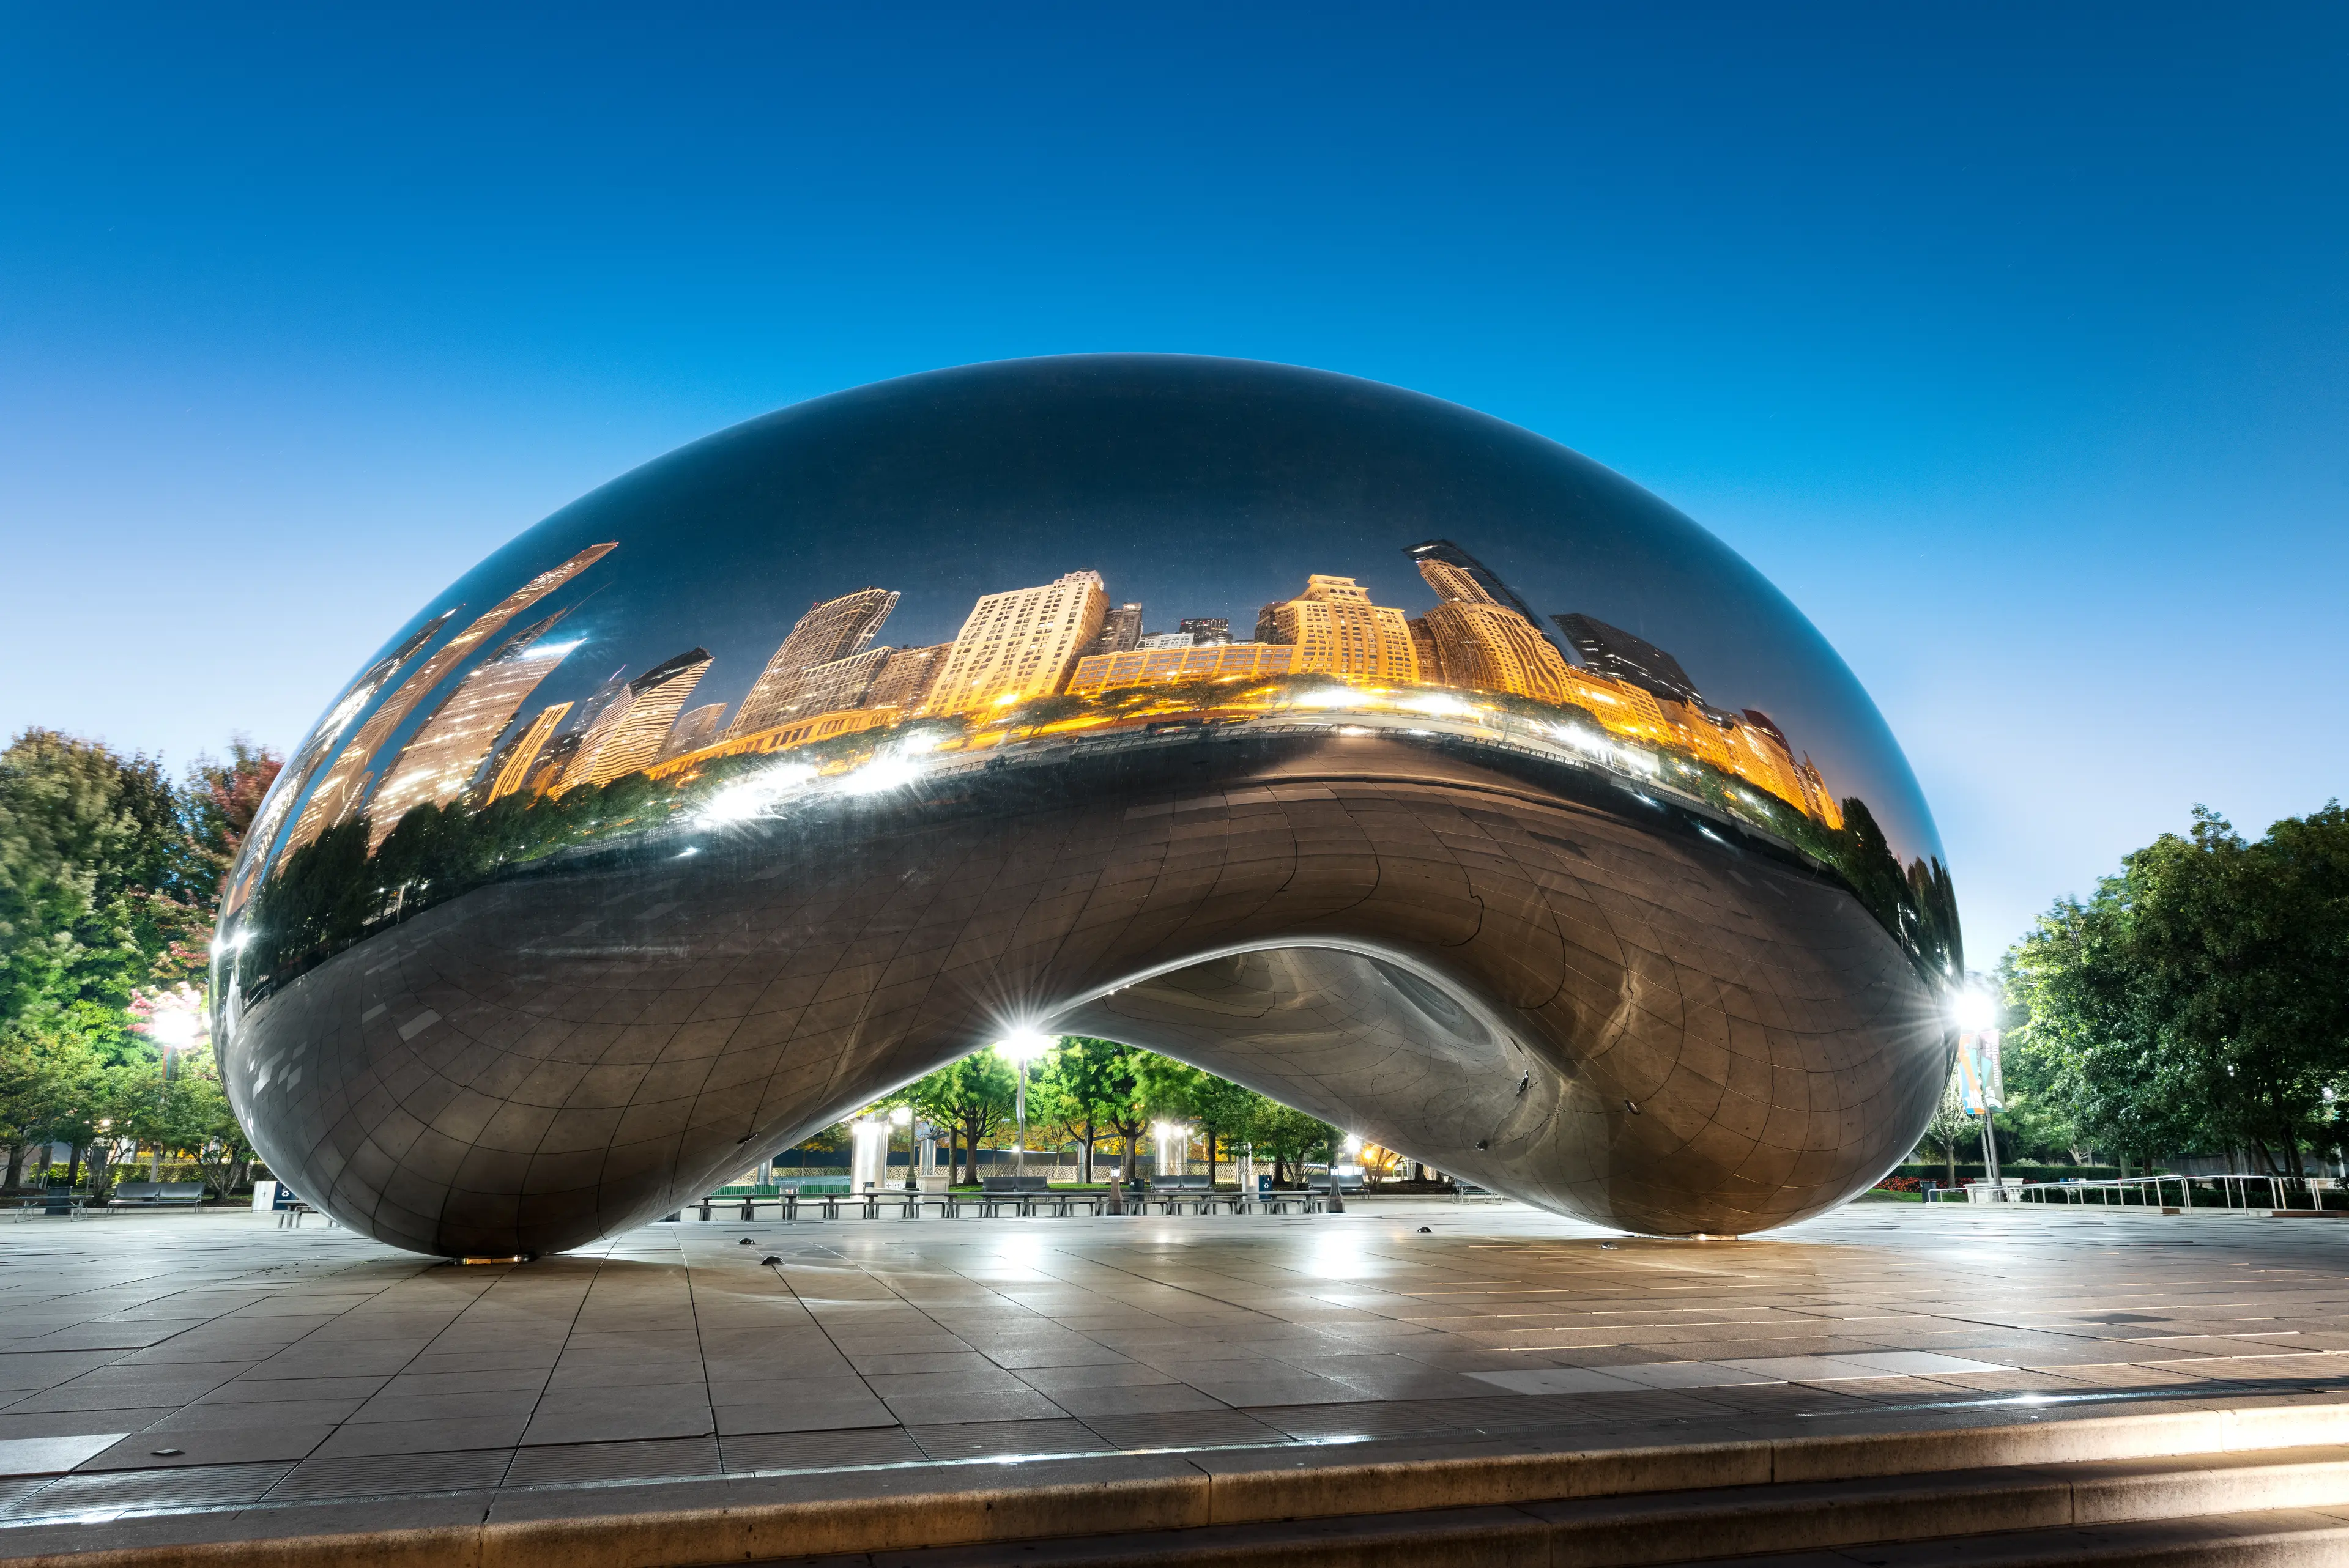 3-Day Chicago Adventure: Nightlife and Sightseeing with Friends